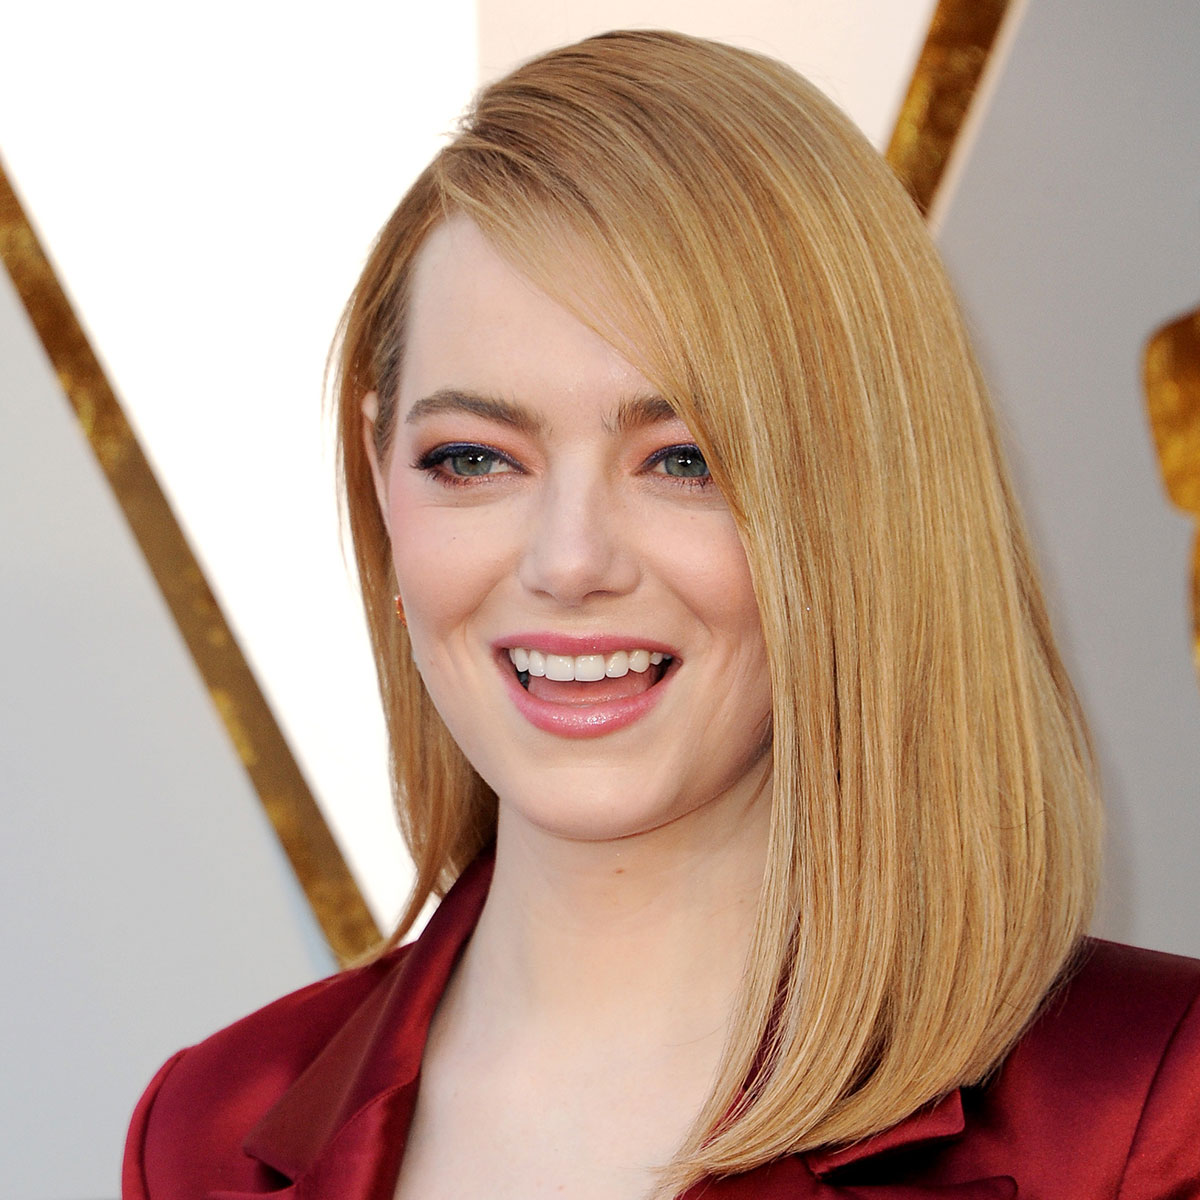 Emma Stone Shows Off Her Tiny Waist In Cinched, Elegant White